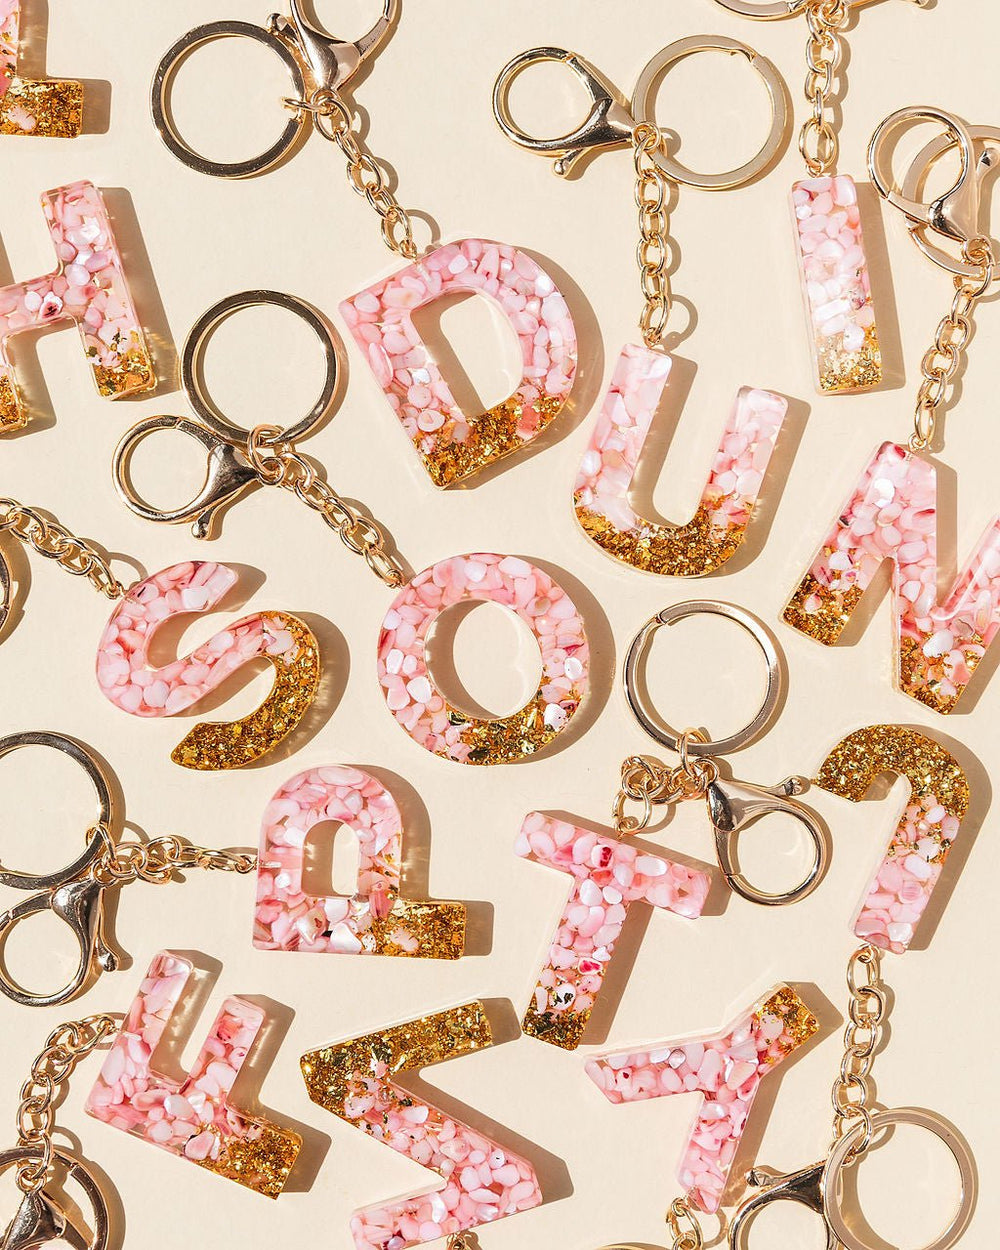 Handmade A-Z Letter Keyring with Pink stone shavings and Gold Foil - Gifts Handmade